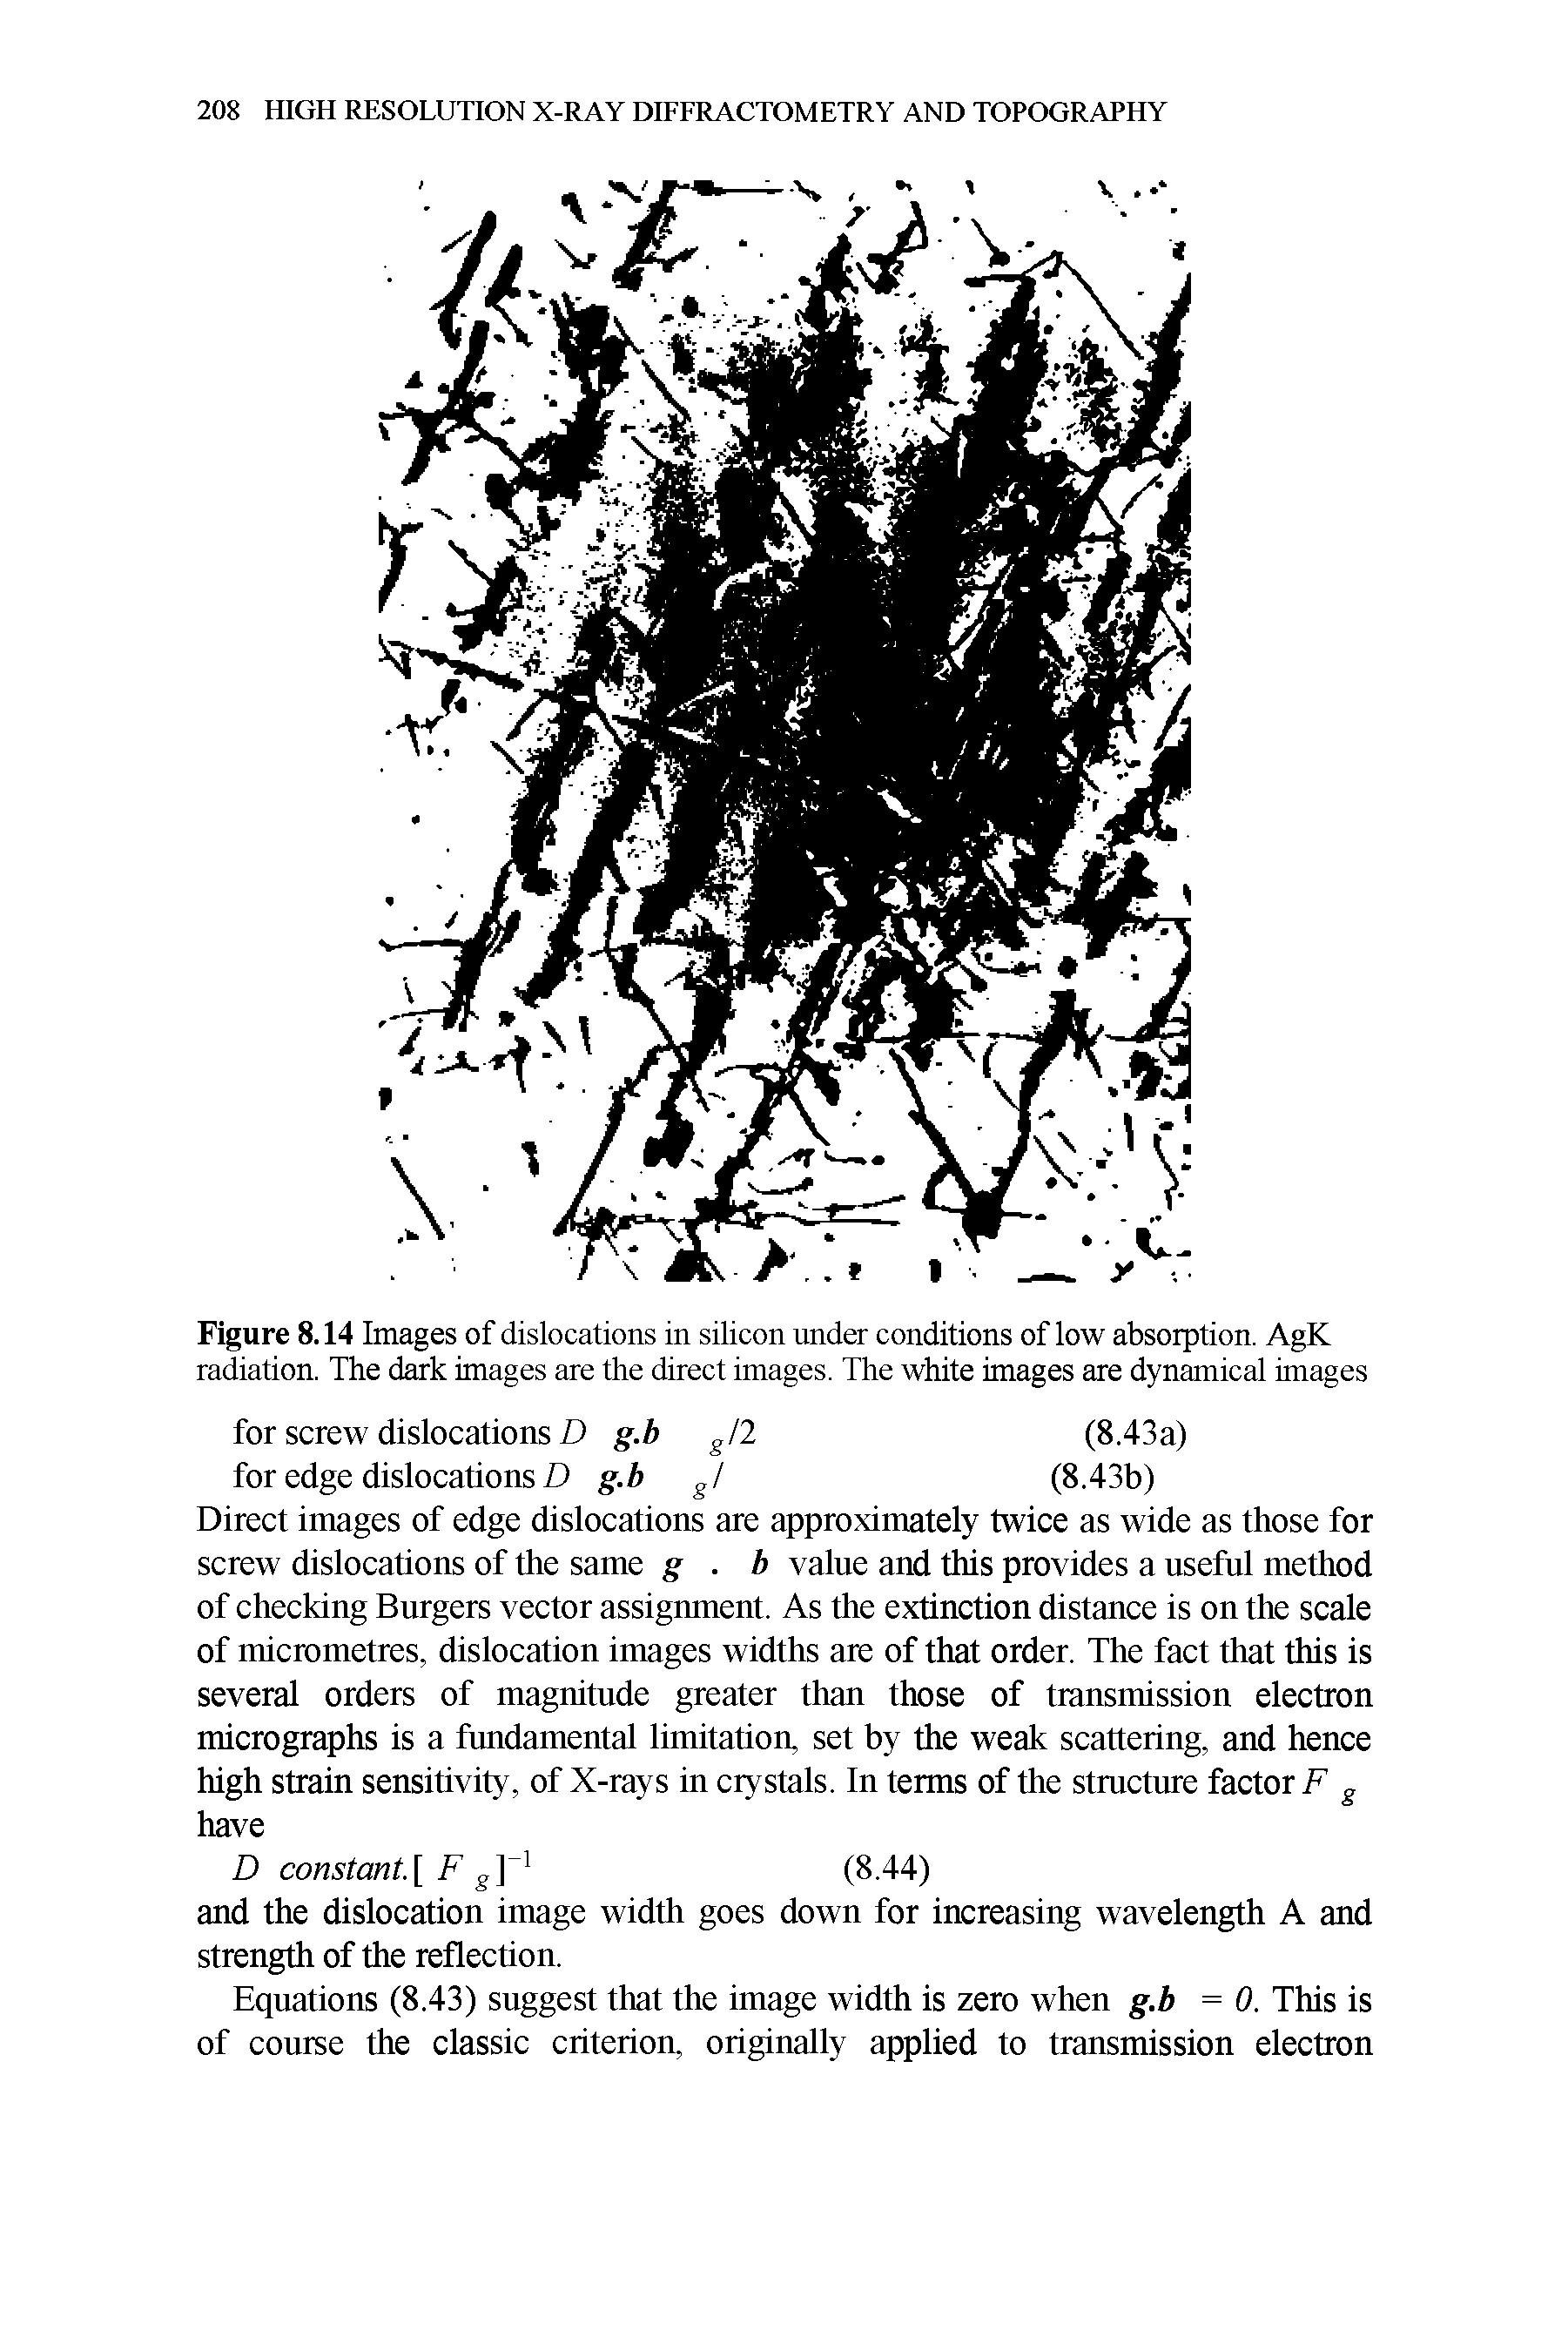 Figure 8.14 Images of dislocations in silicon under conditions of low absorption. AgK radiation. The dark images are the direct images. The white images are dynamical images...